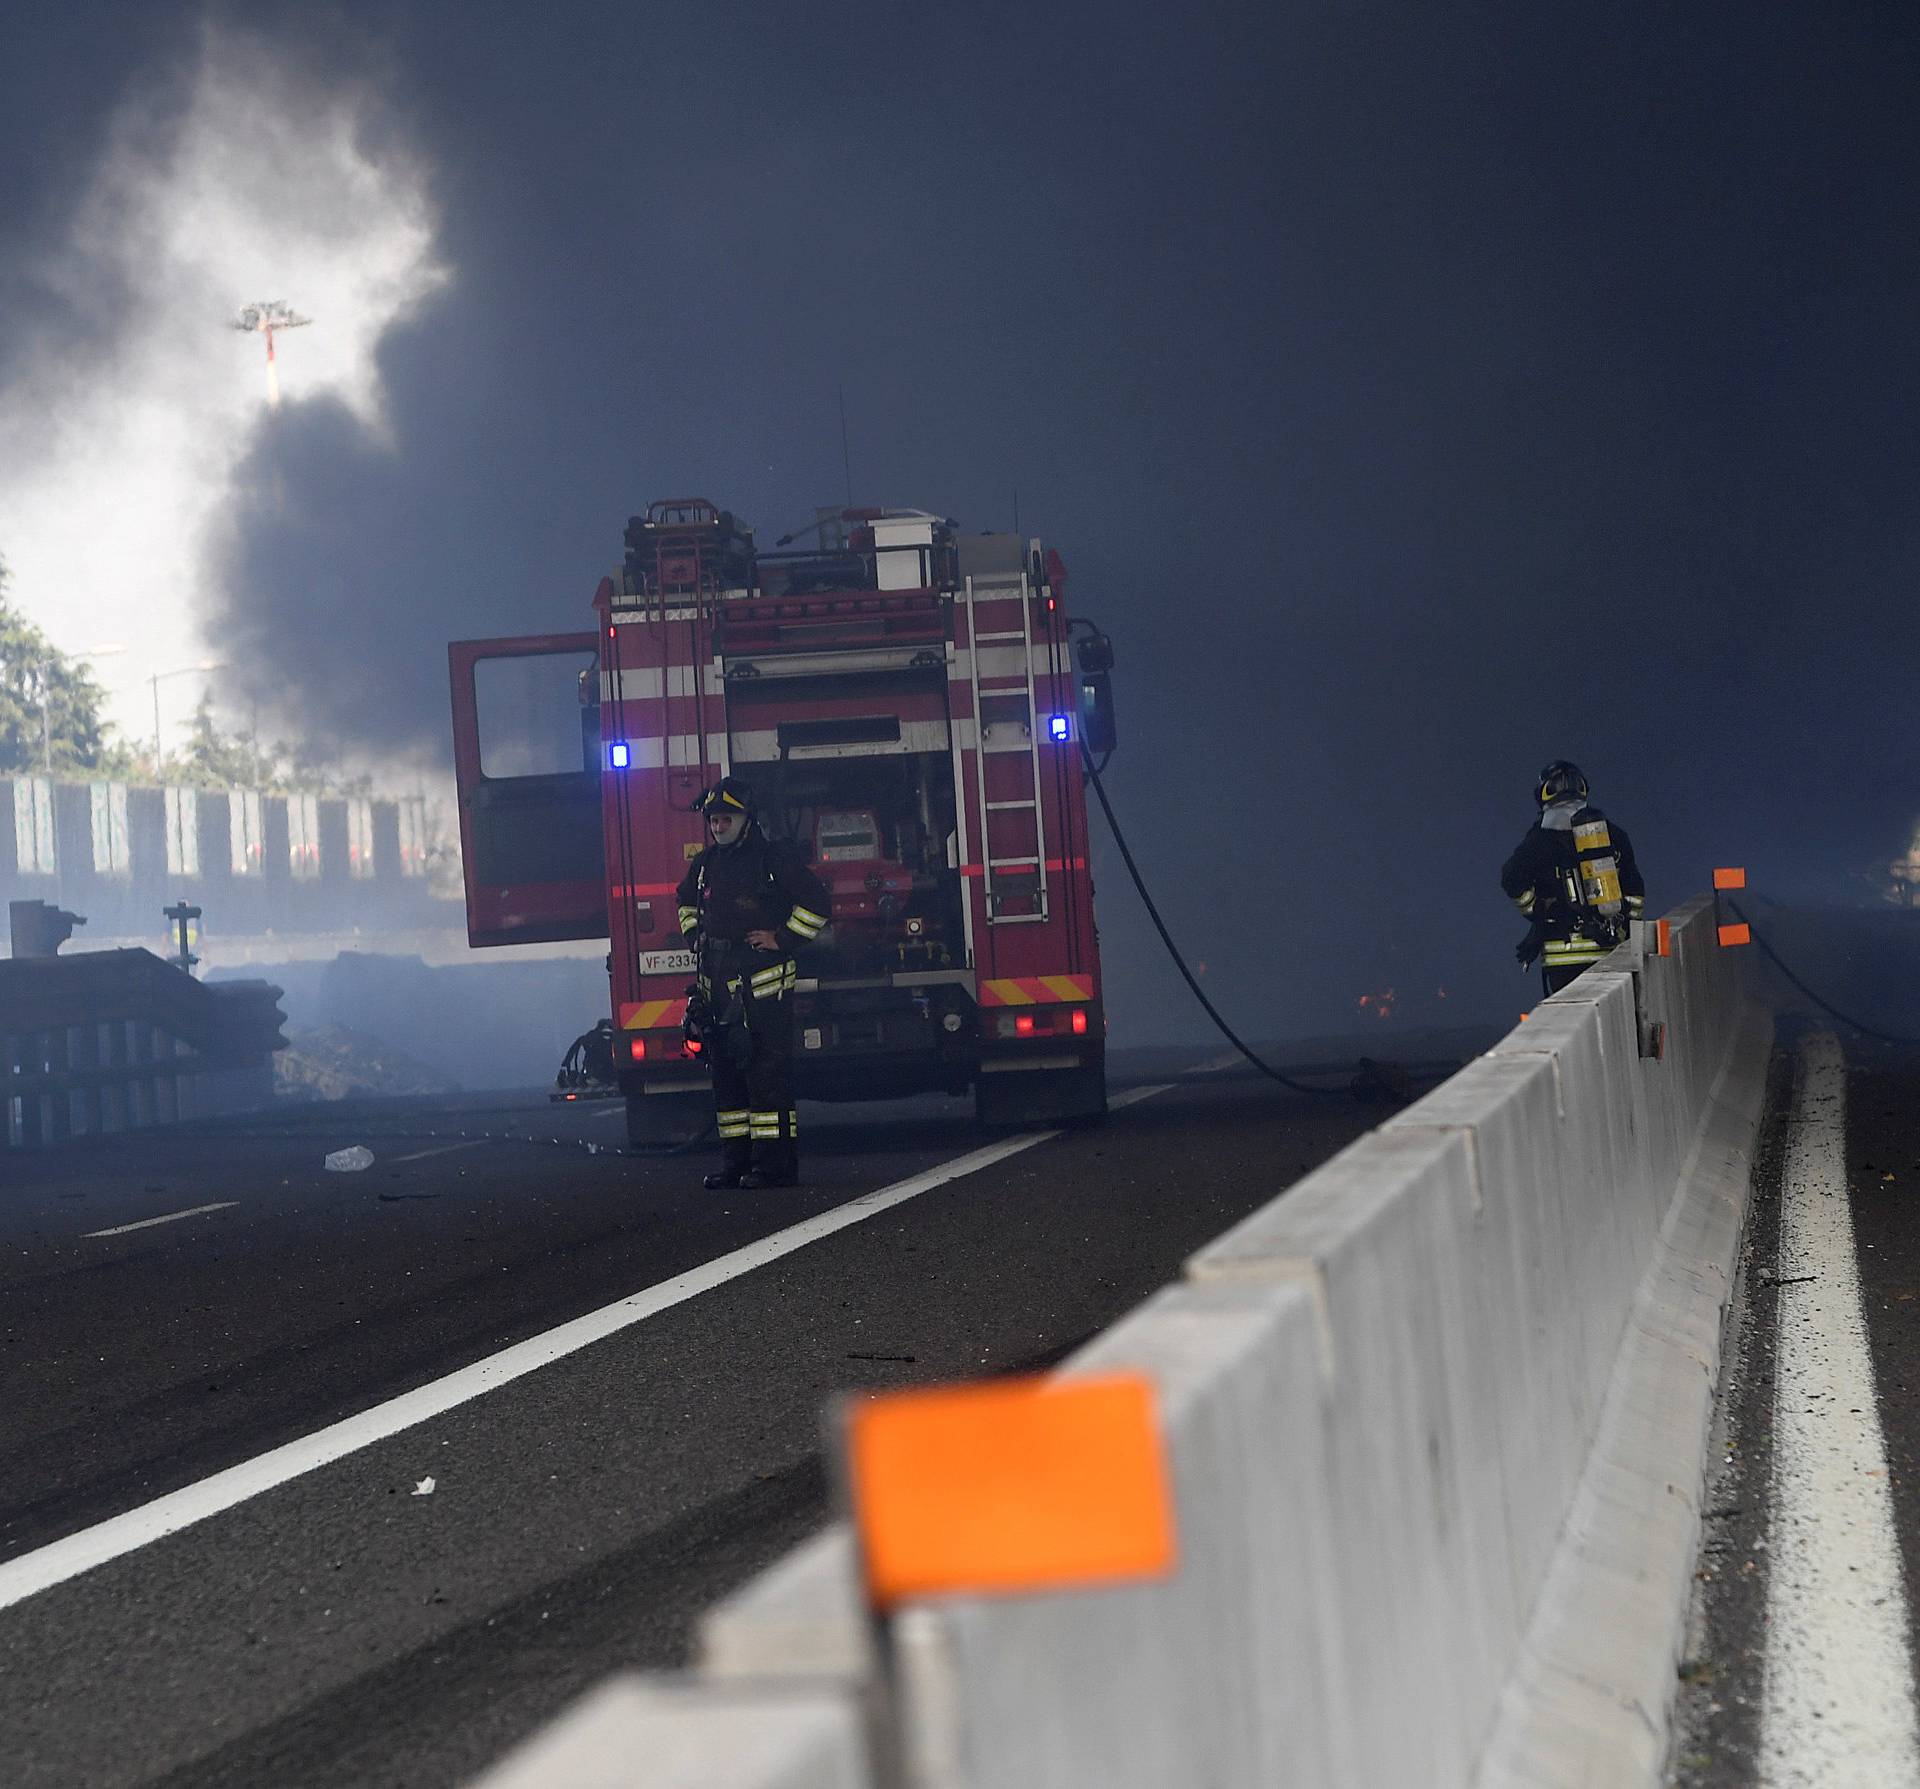 Firefighters work on the motorway after an accident caused a large explosion and  fire at Borgo Panigale, on the outskirts of Bologna